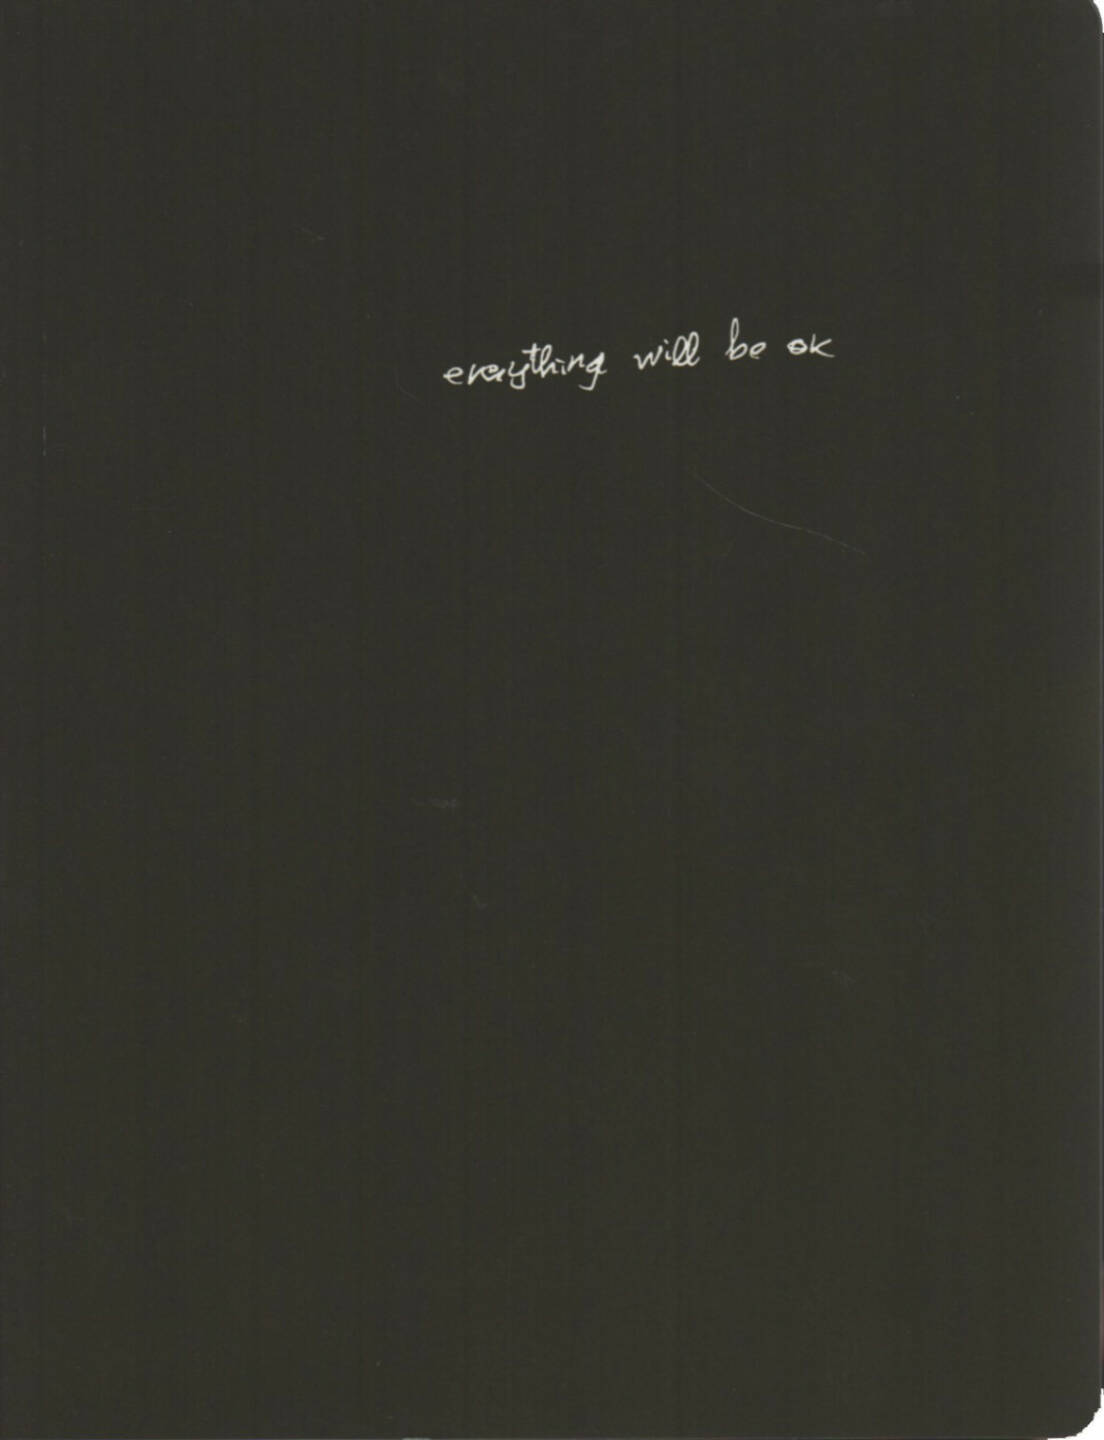 Alberto Lizaralde - everything will be ok, Self published 2014, Cover - http://josefchladek.com/book/alberto_lizaralde_-_everything_will_be_ok